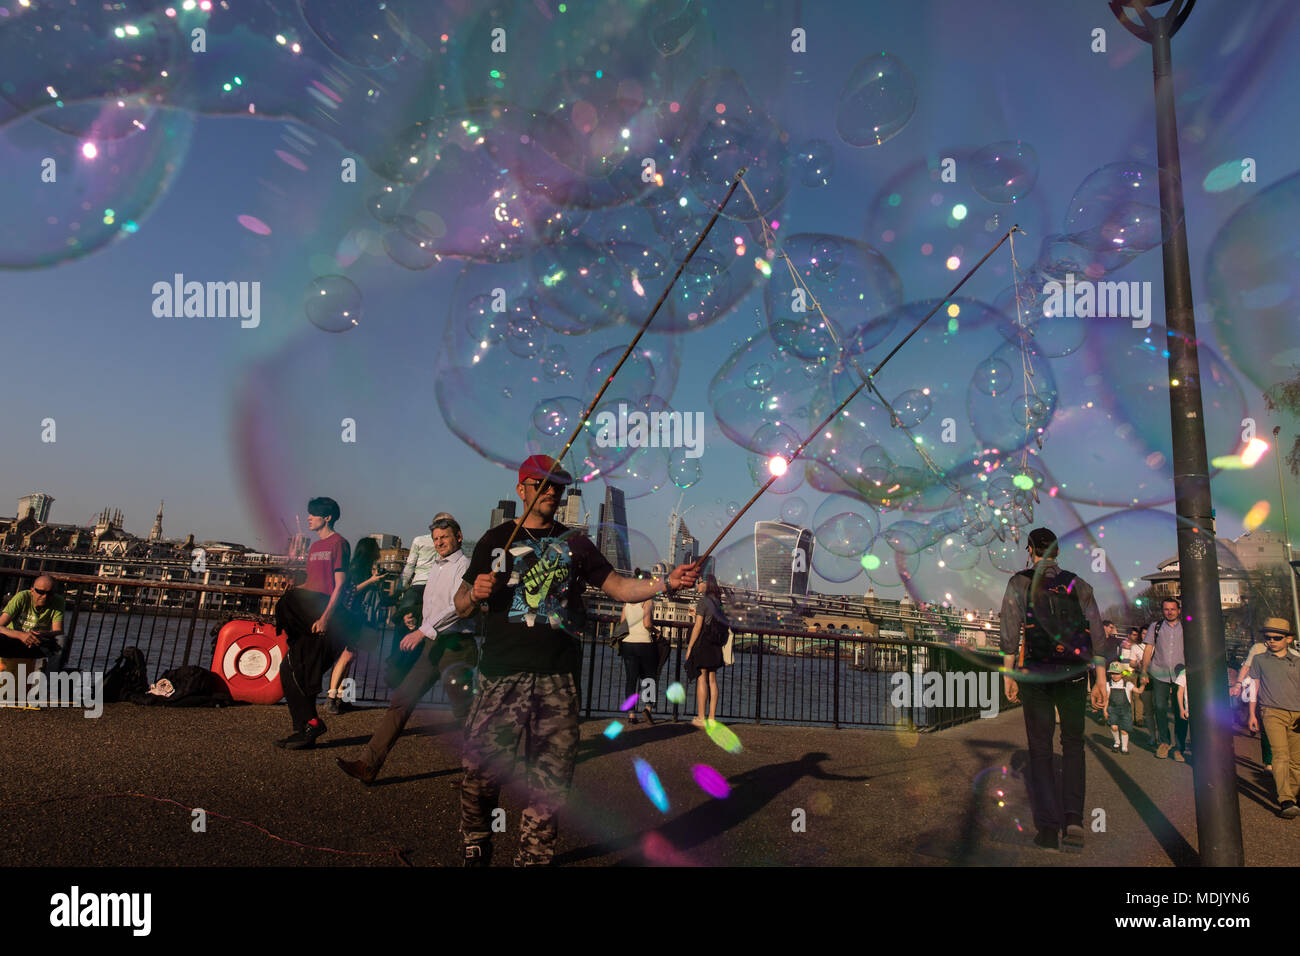 London, UK. 19th April, 2018. UK Weather: A busker makes bubbles for passers by on the southbank of the Thames during a beautiful evening in London, UK Credit: Carol Moir Stock Photo